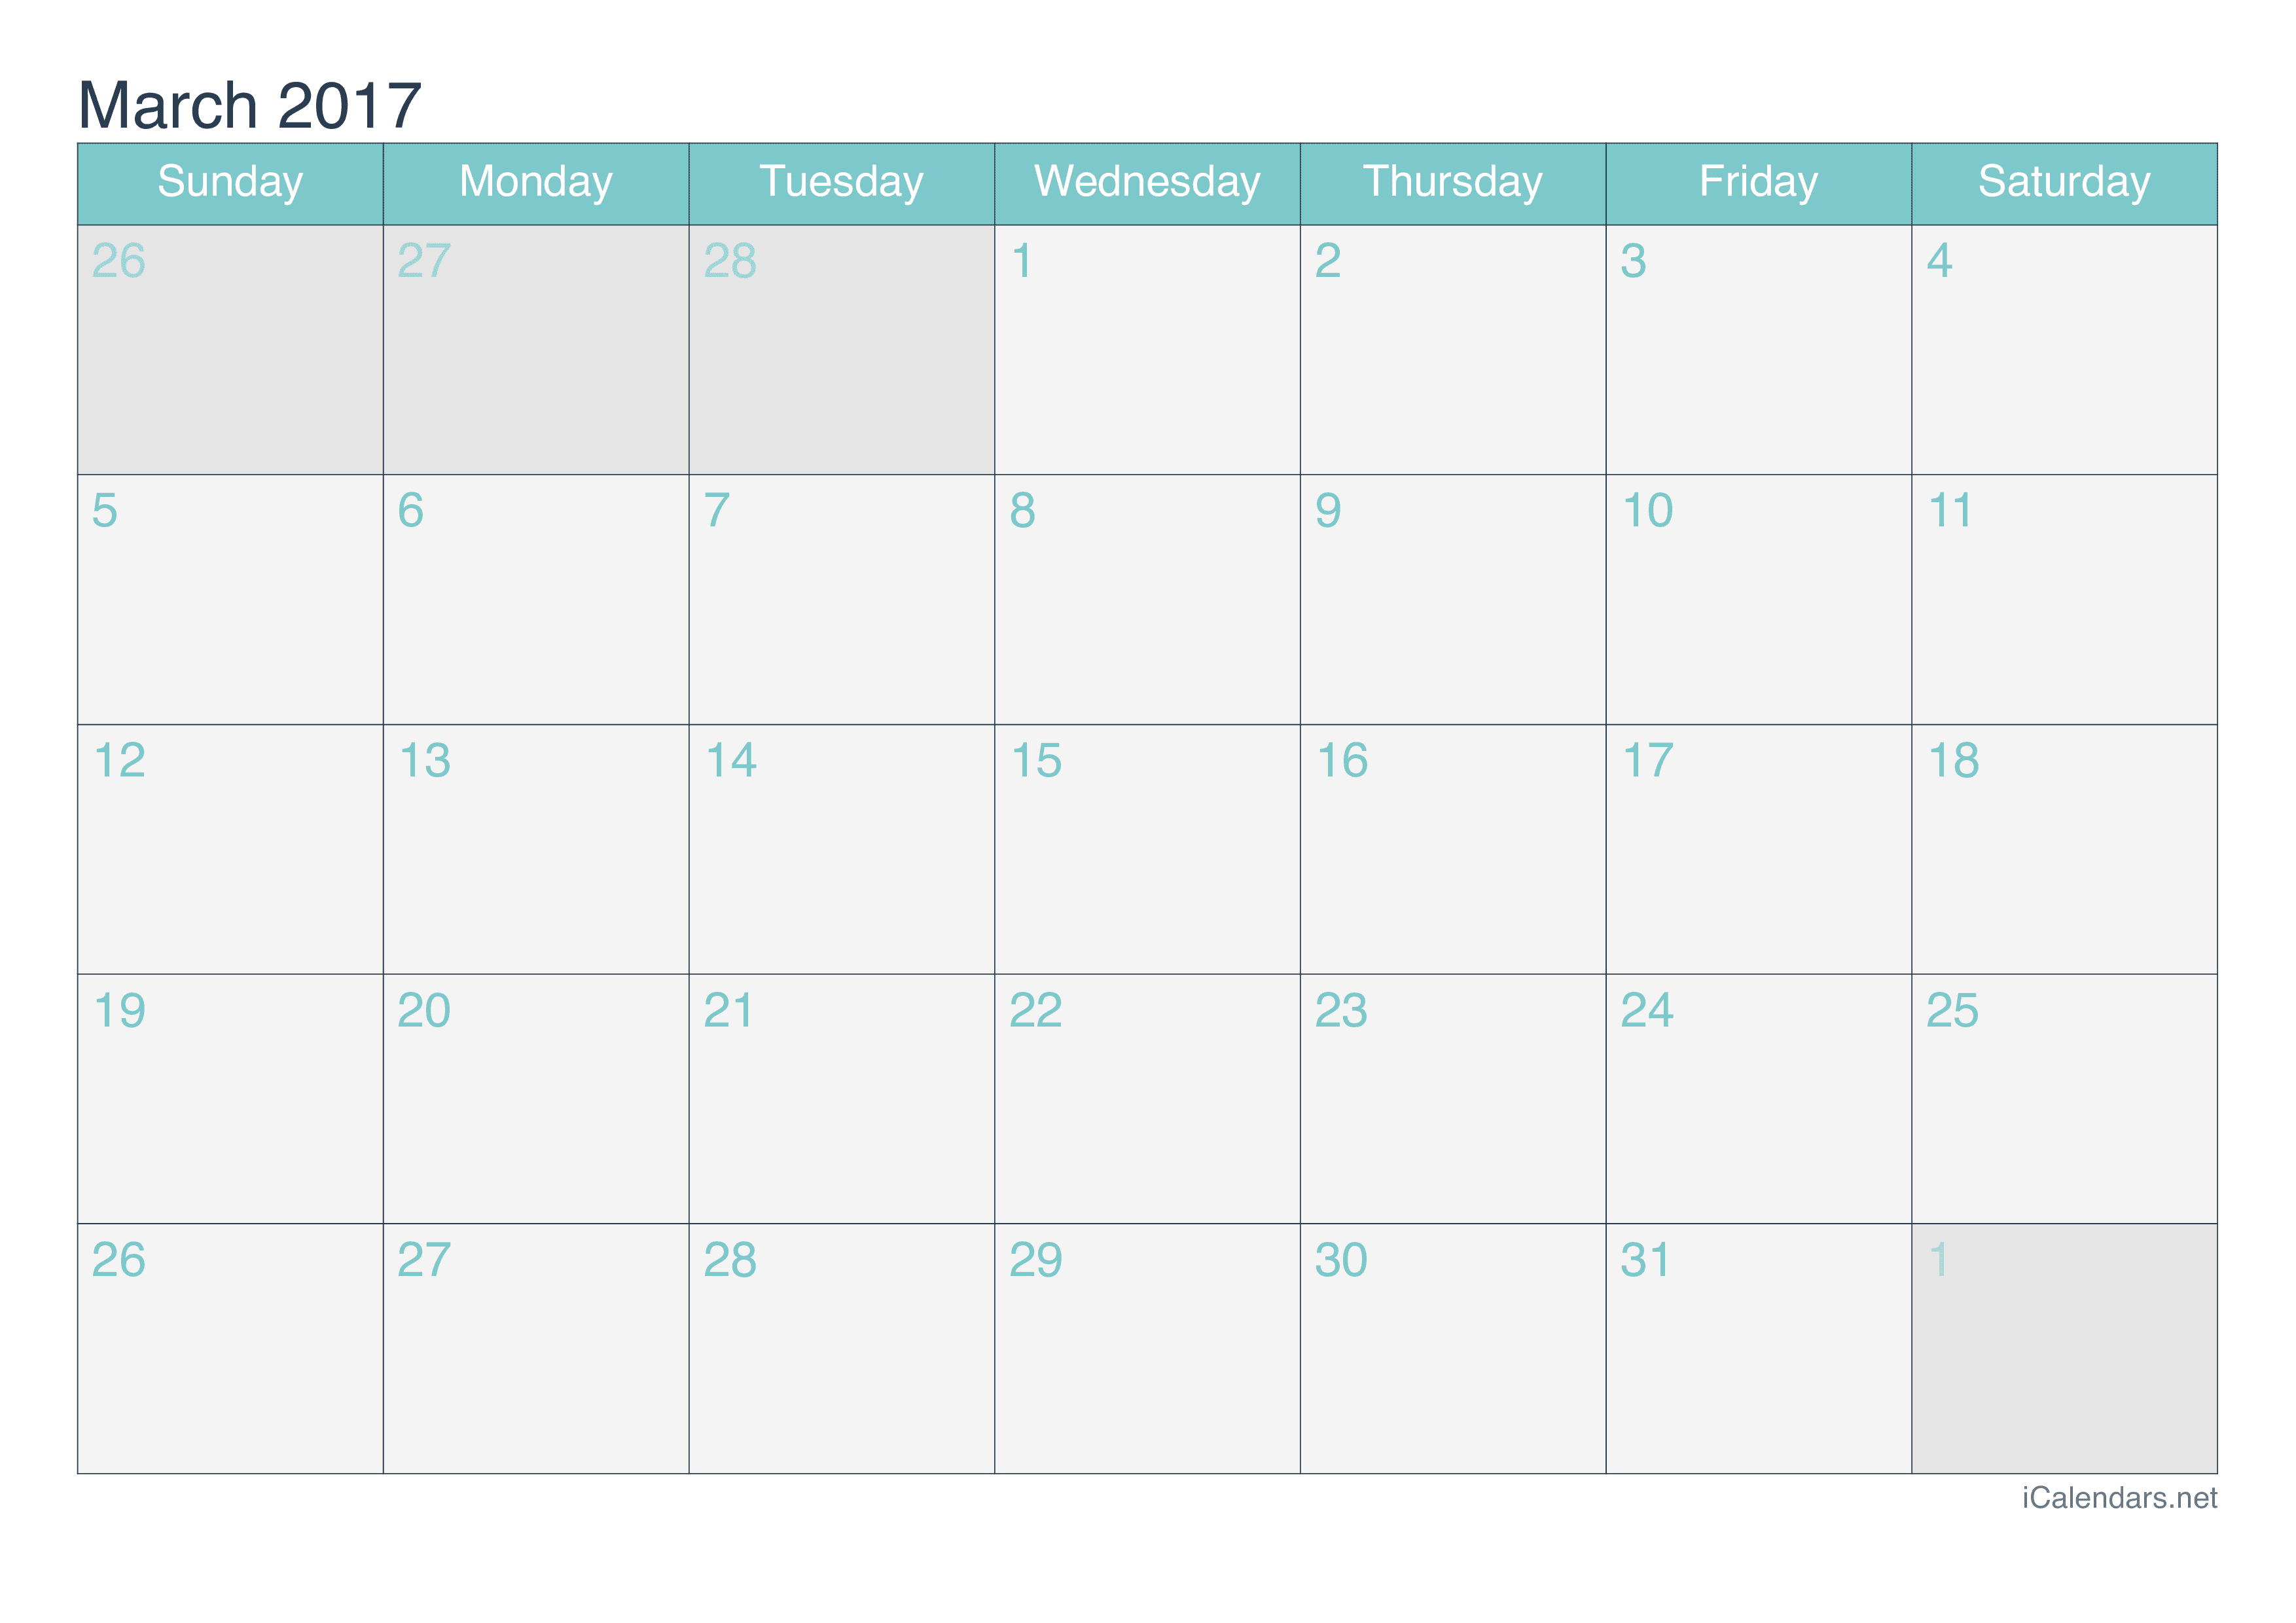 2017 March Calendar - Turquoise